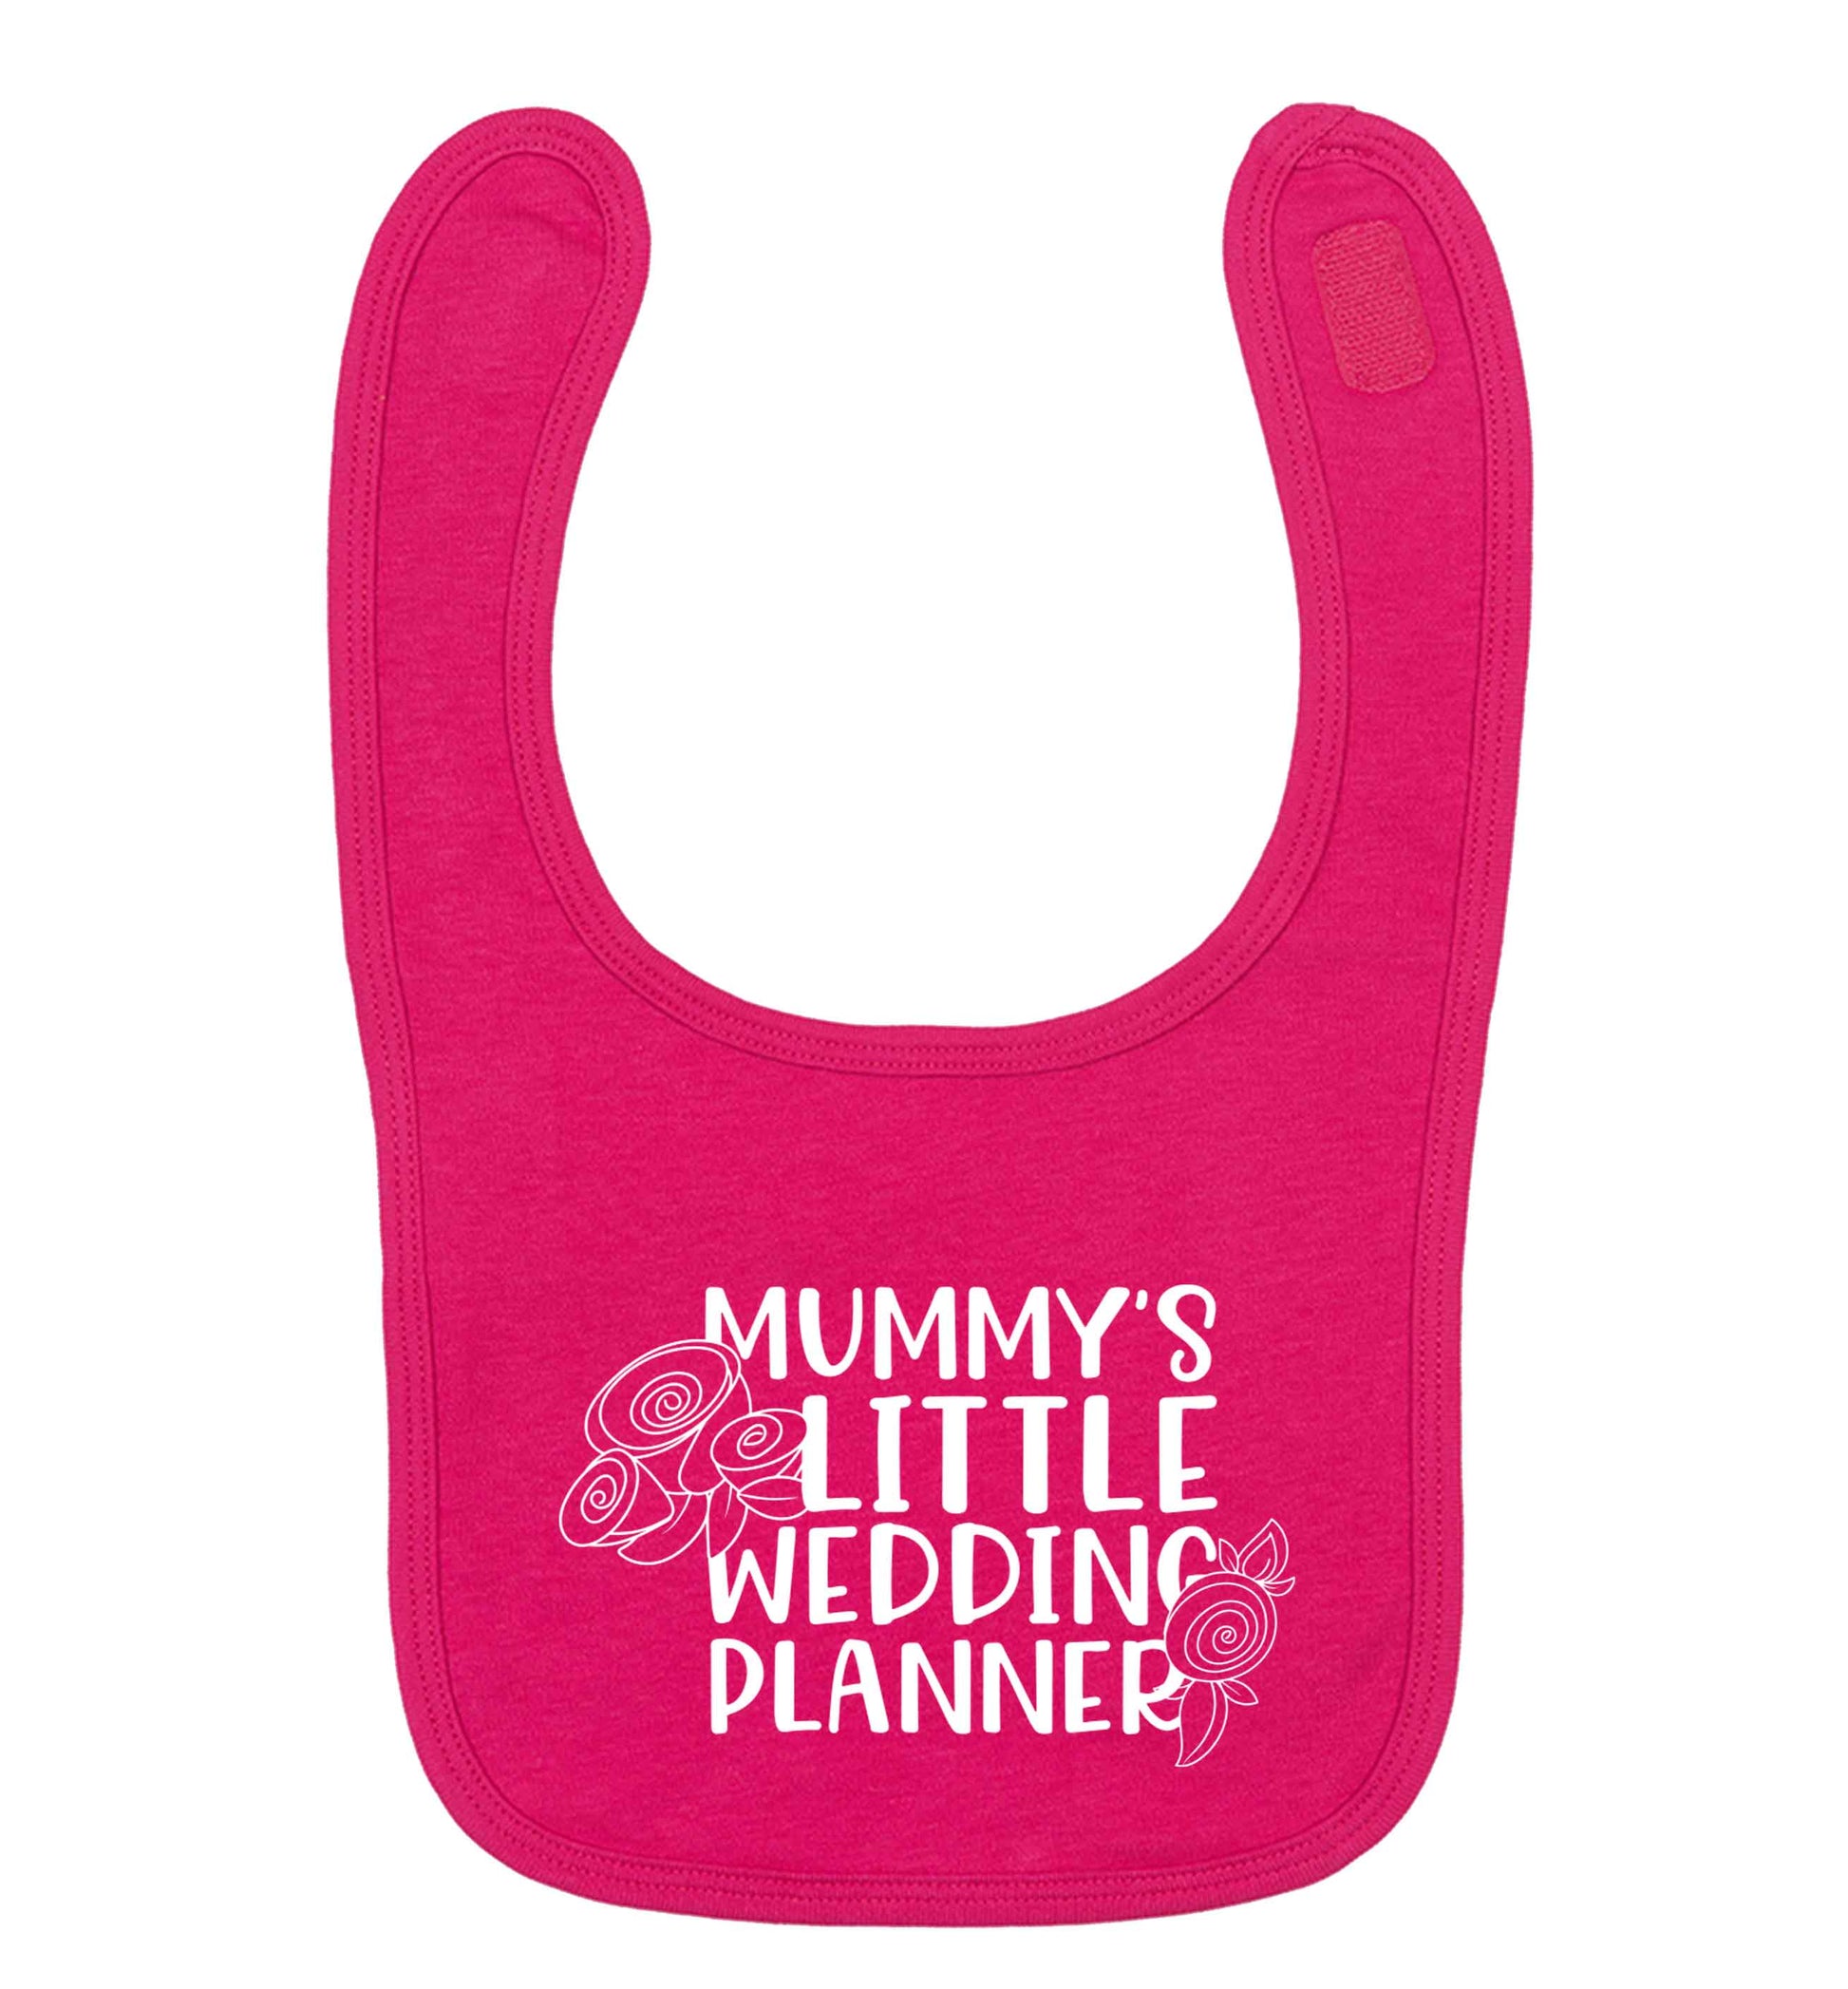 adorable wedding themed gifts for your mini wedding planner! dark pink baby bib